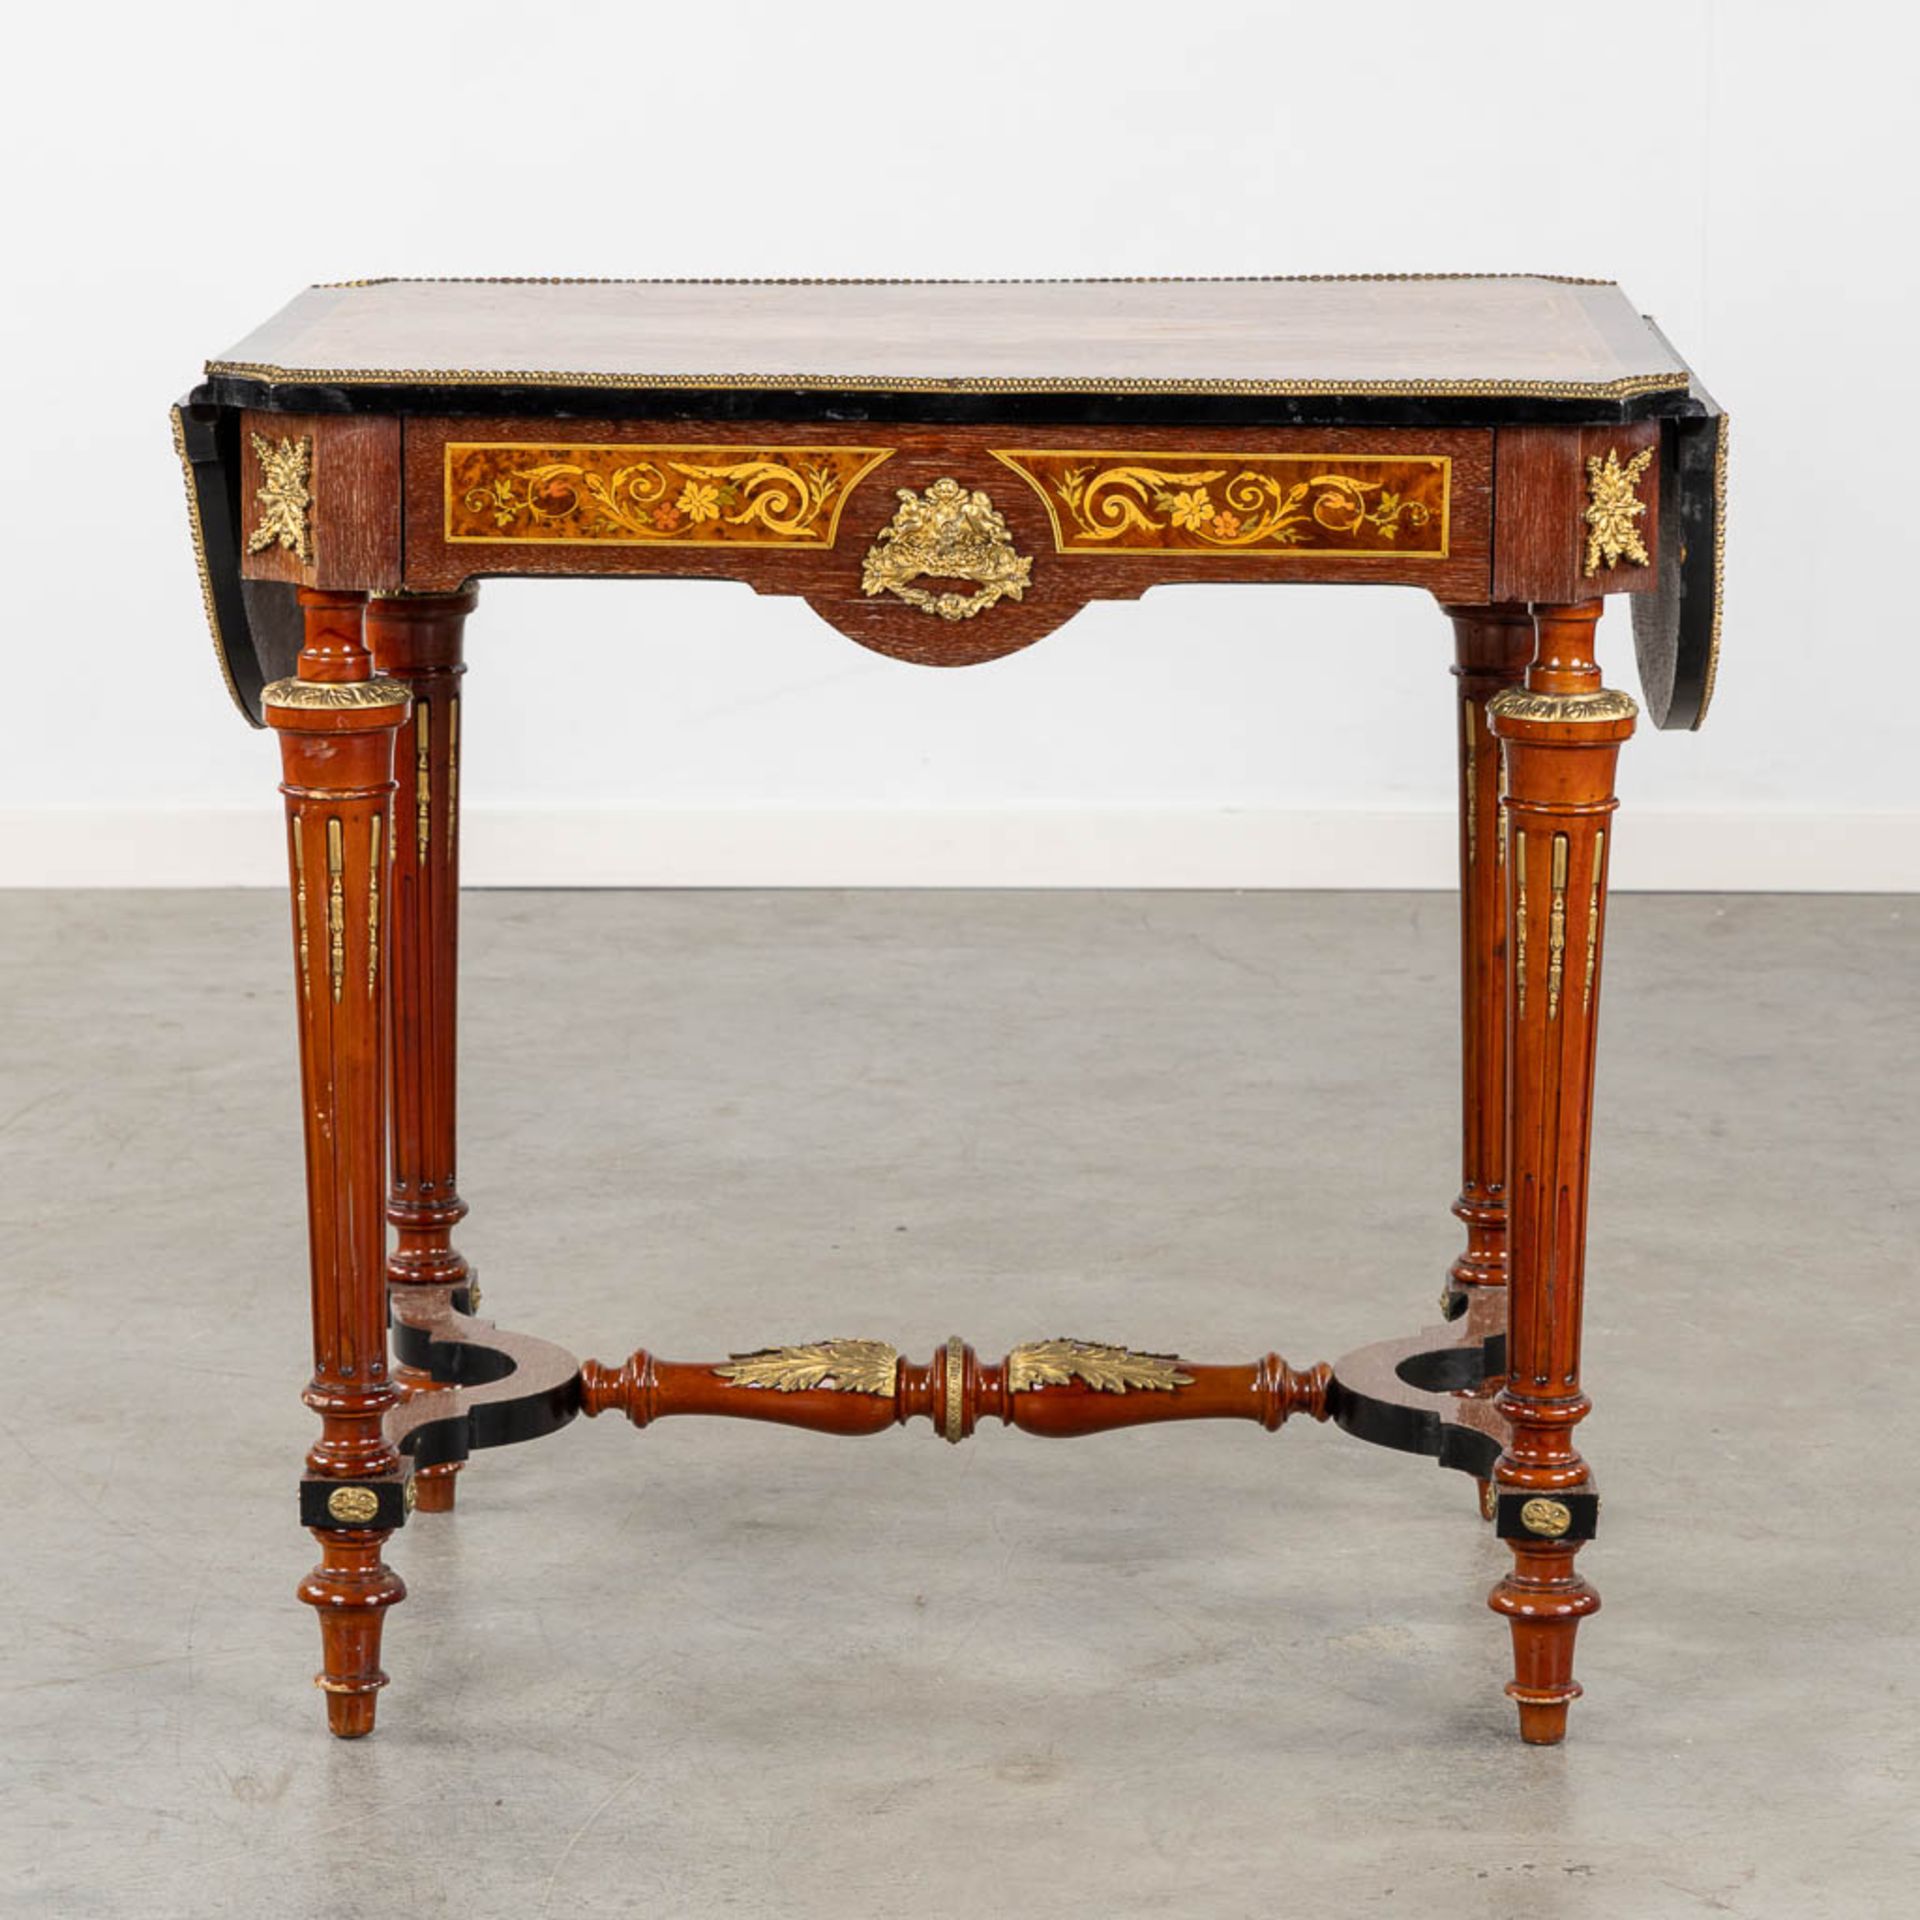 A side table/play table, marquetry inlay and mounted with bronze. 20th C. (L:57 x W:115 x H:74 cm) - Bild 5 aus 19